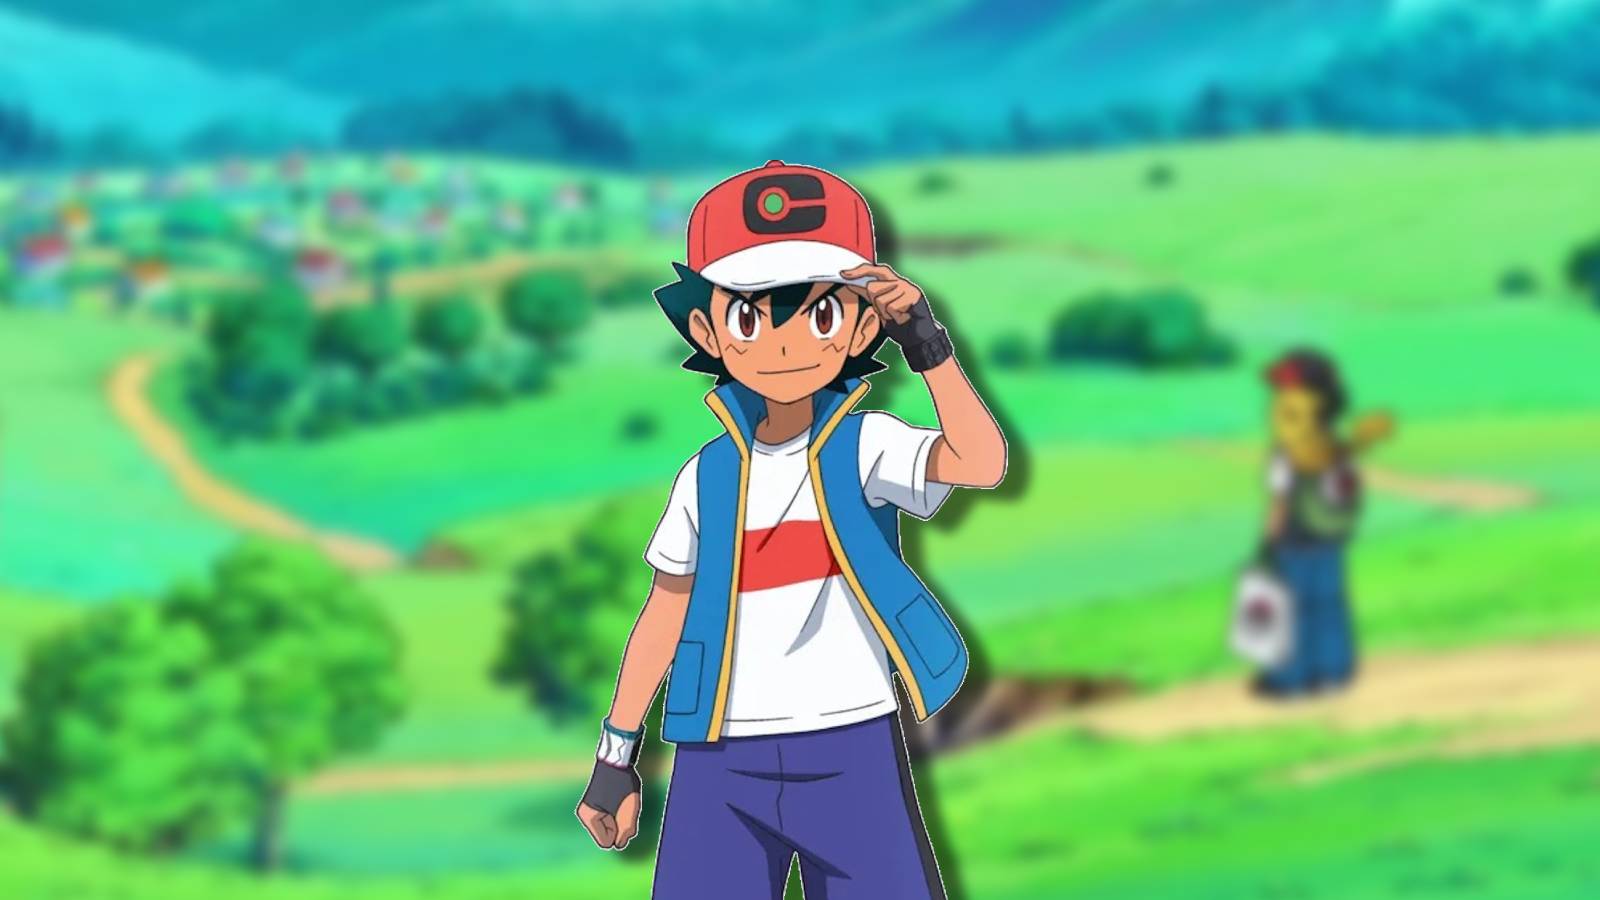 Pokemon Go players celebrate the “one benefit” for rural players